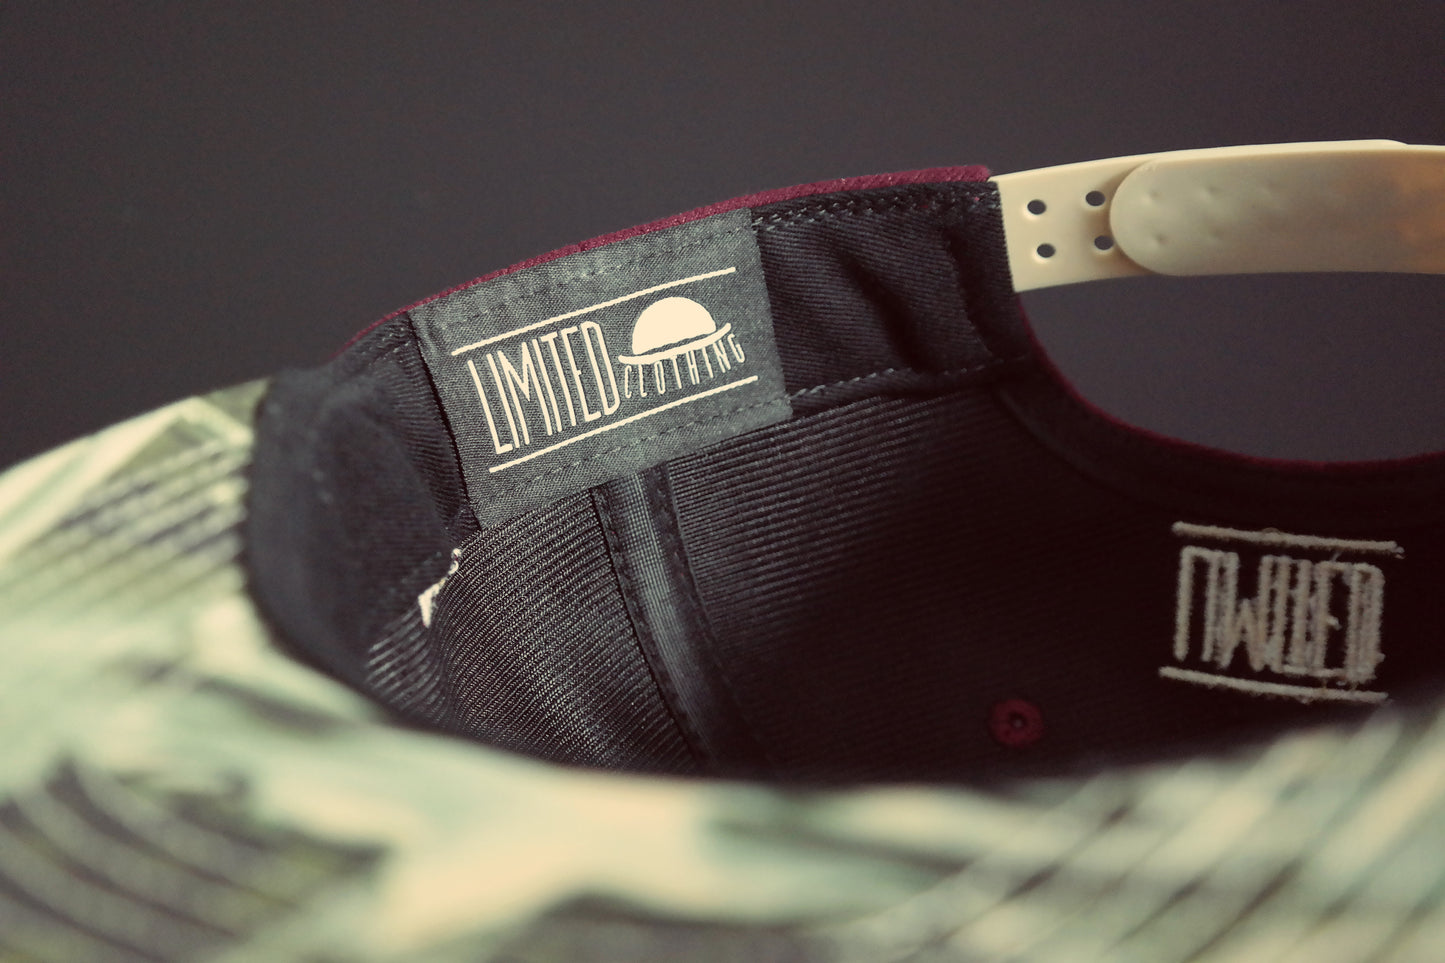 Limited_Limitierte_Snapback_Cap_Throwback_07